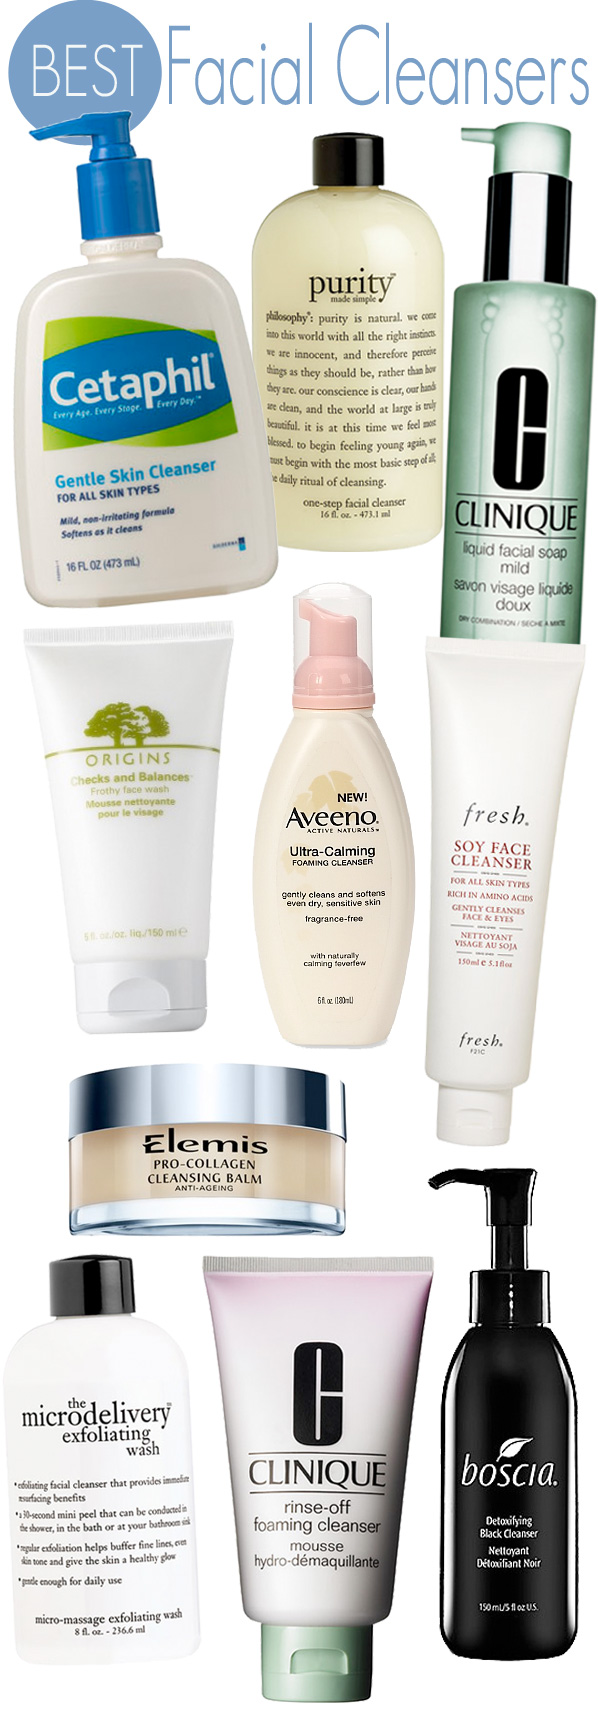 Top 10 Facial Cleansers — Beautiful Makeup Search